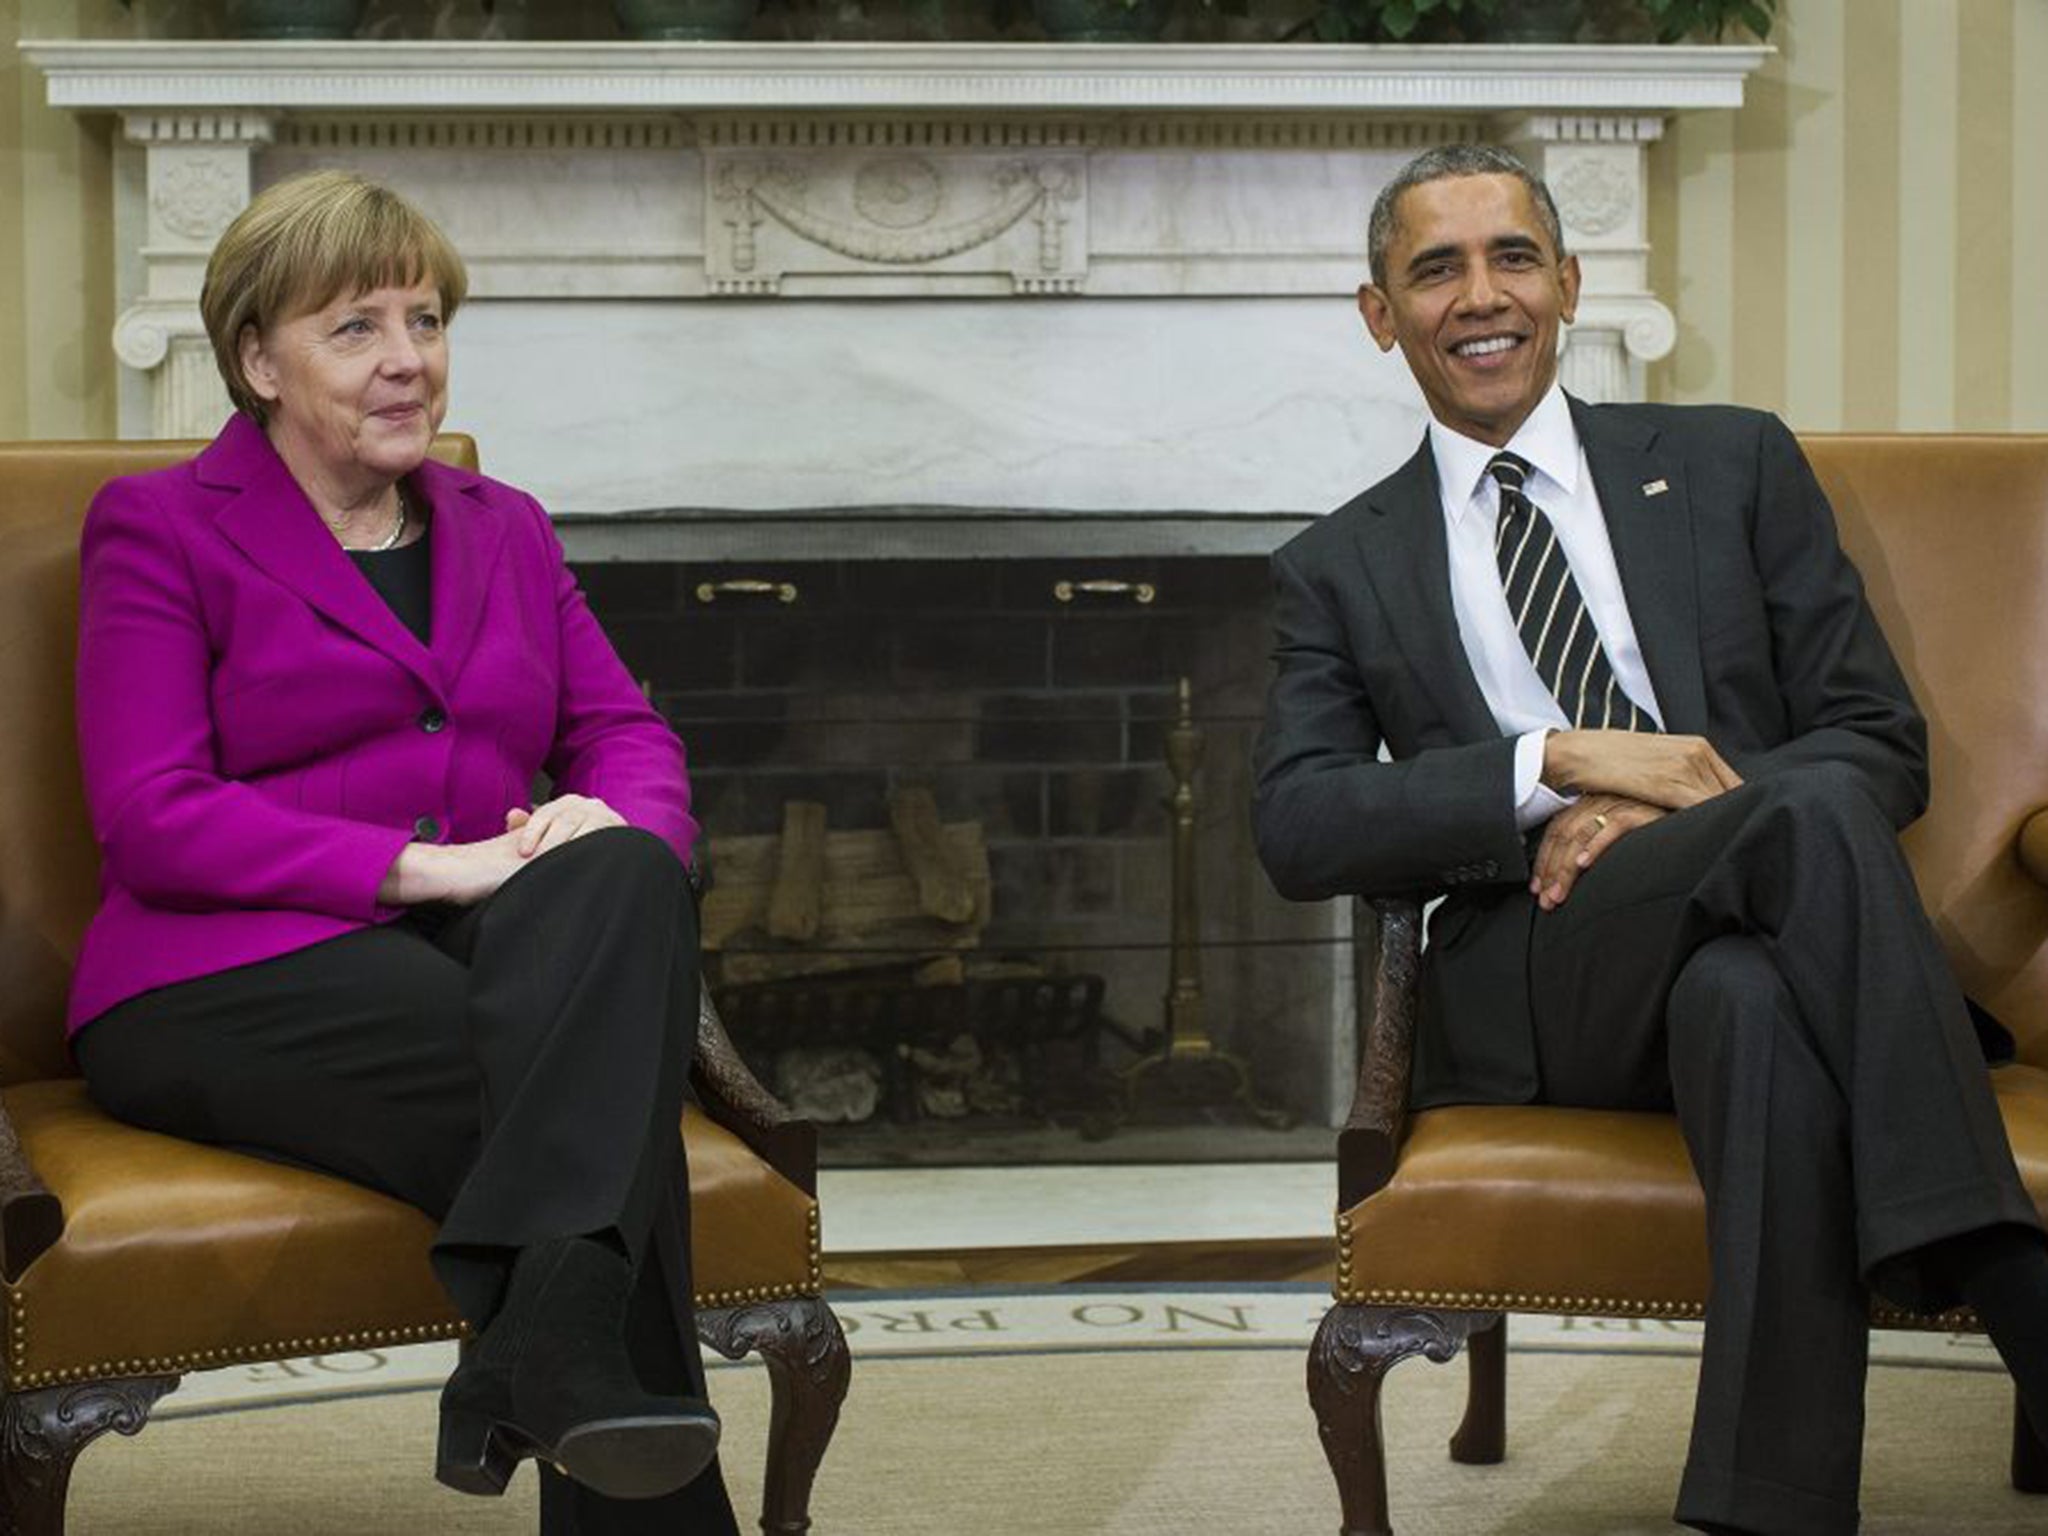 President Obama and Chancellor Merkel before their meeting in the White House on Monday